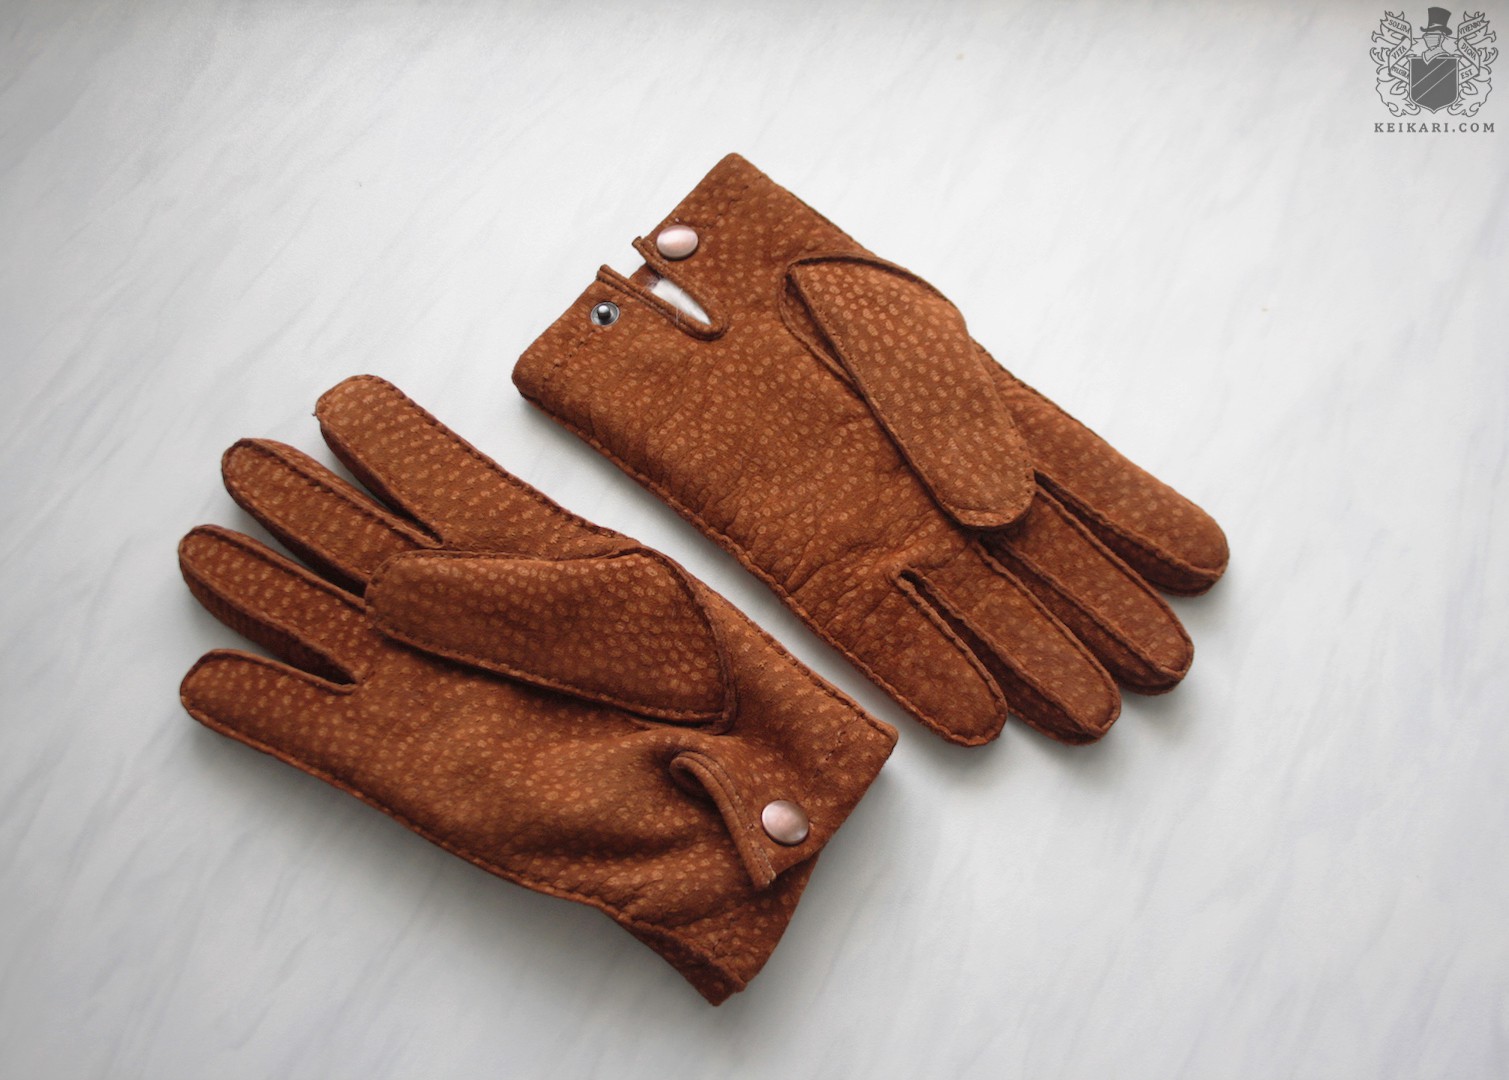 Made_to_measure_gloves_from_Jeeves_Store_at_Keikari_dot_com2